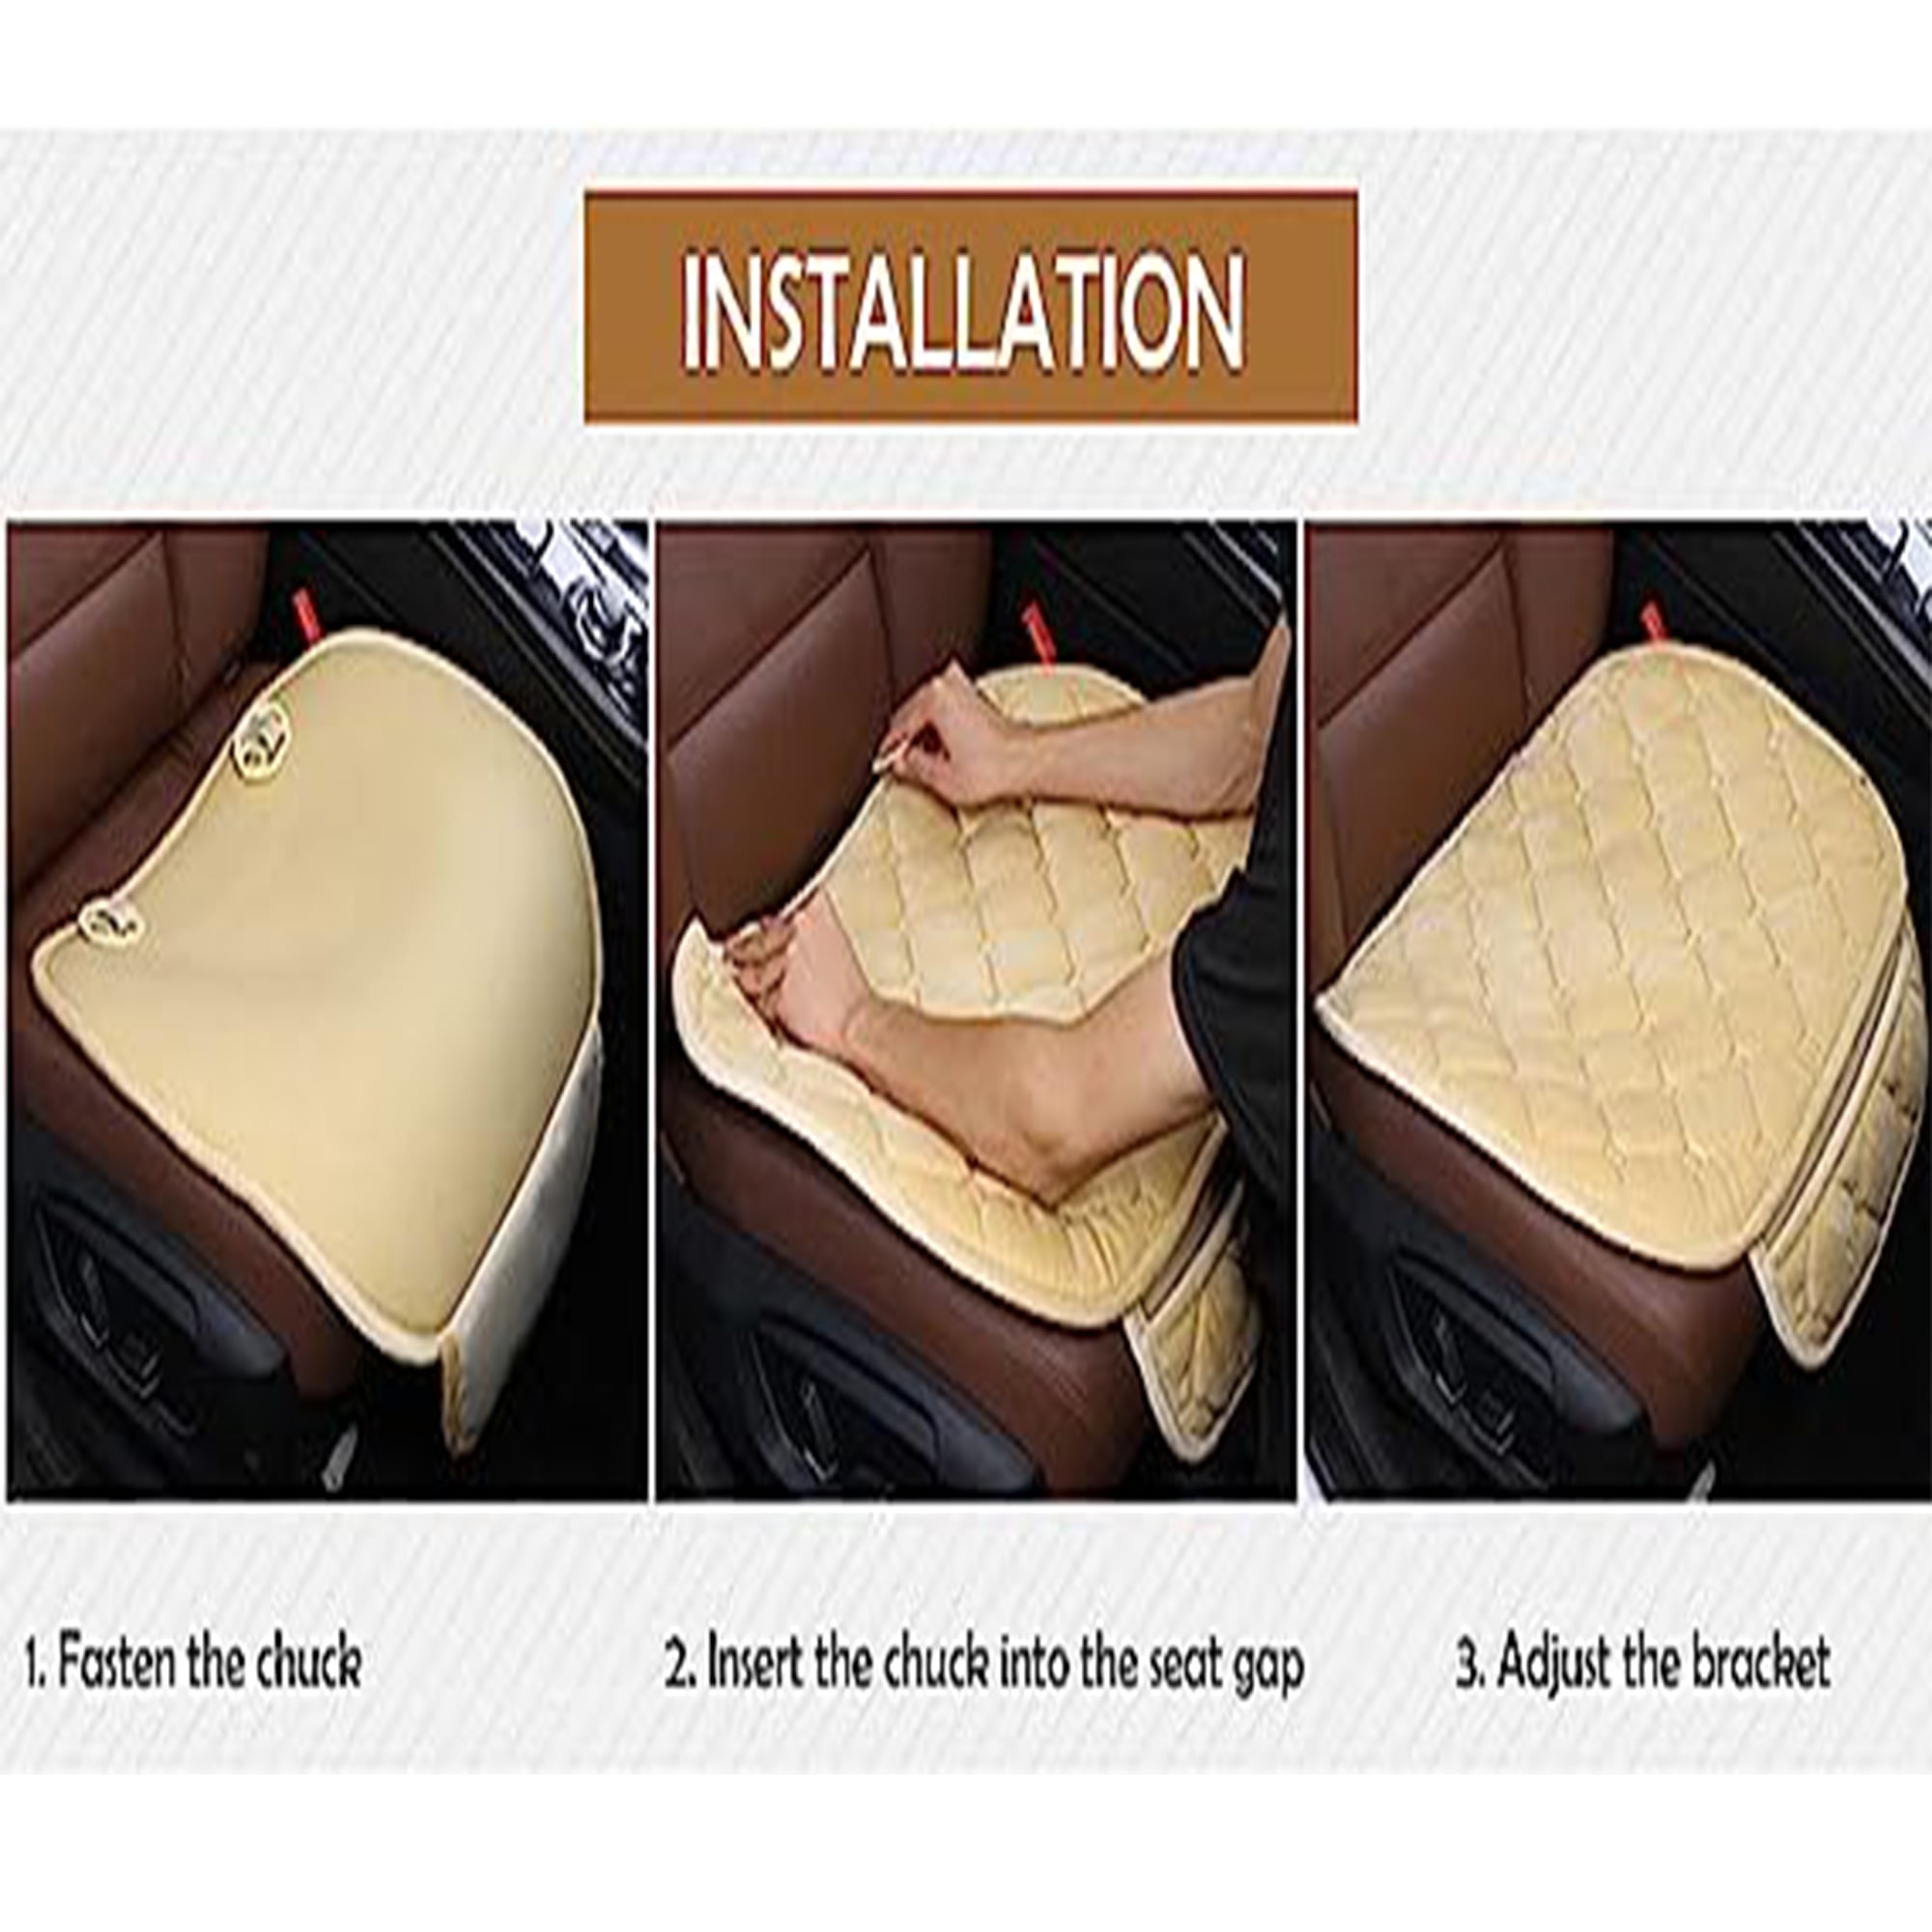 Car Seat Cushion With Non-slip Rubber Bottom And Storage Bag, High